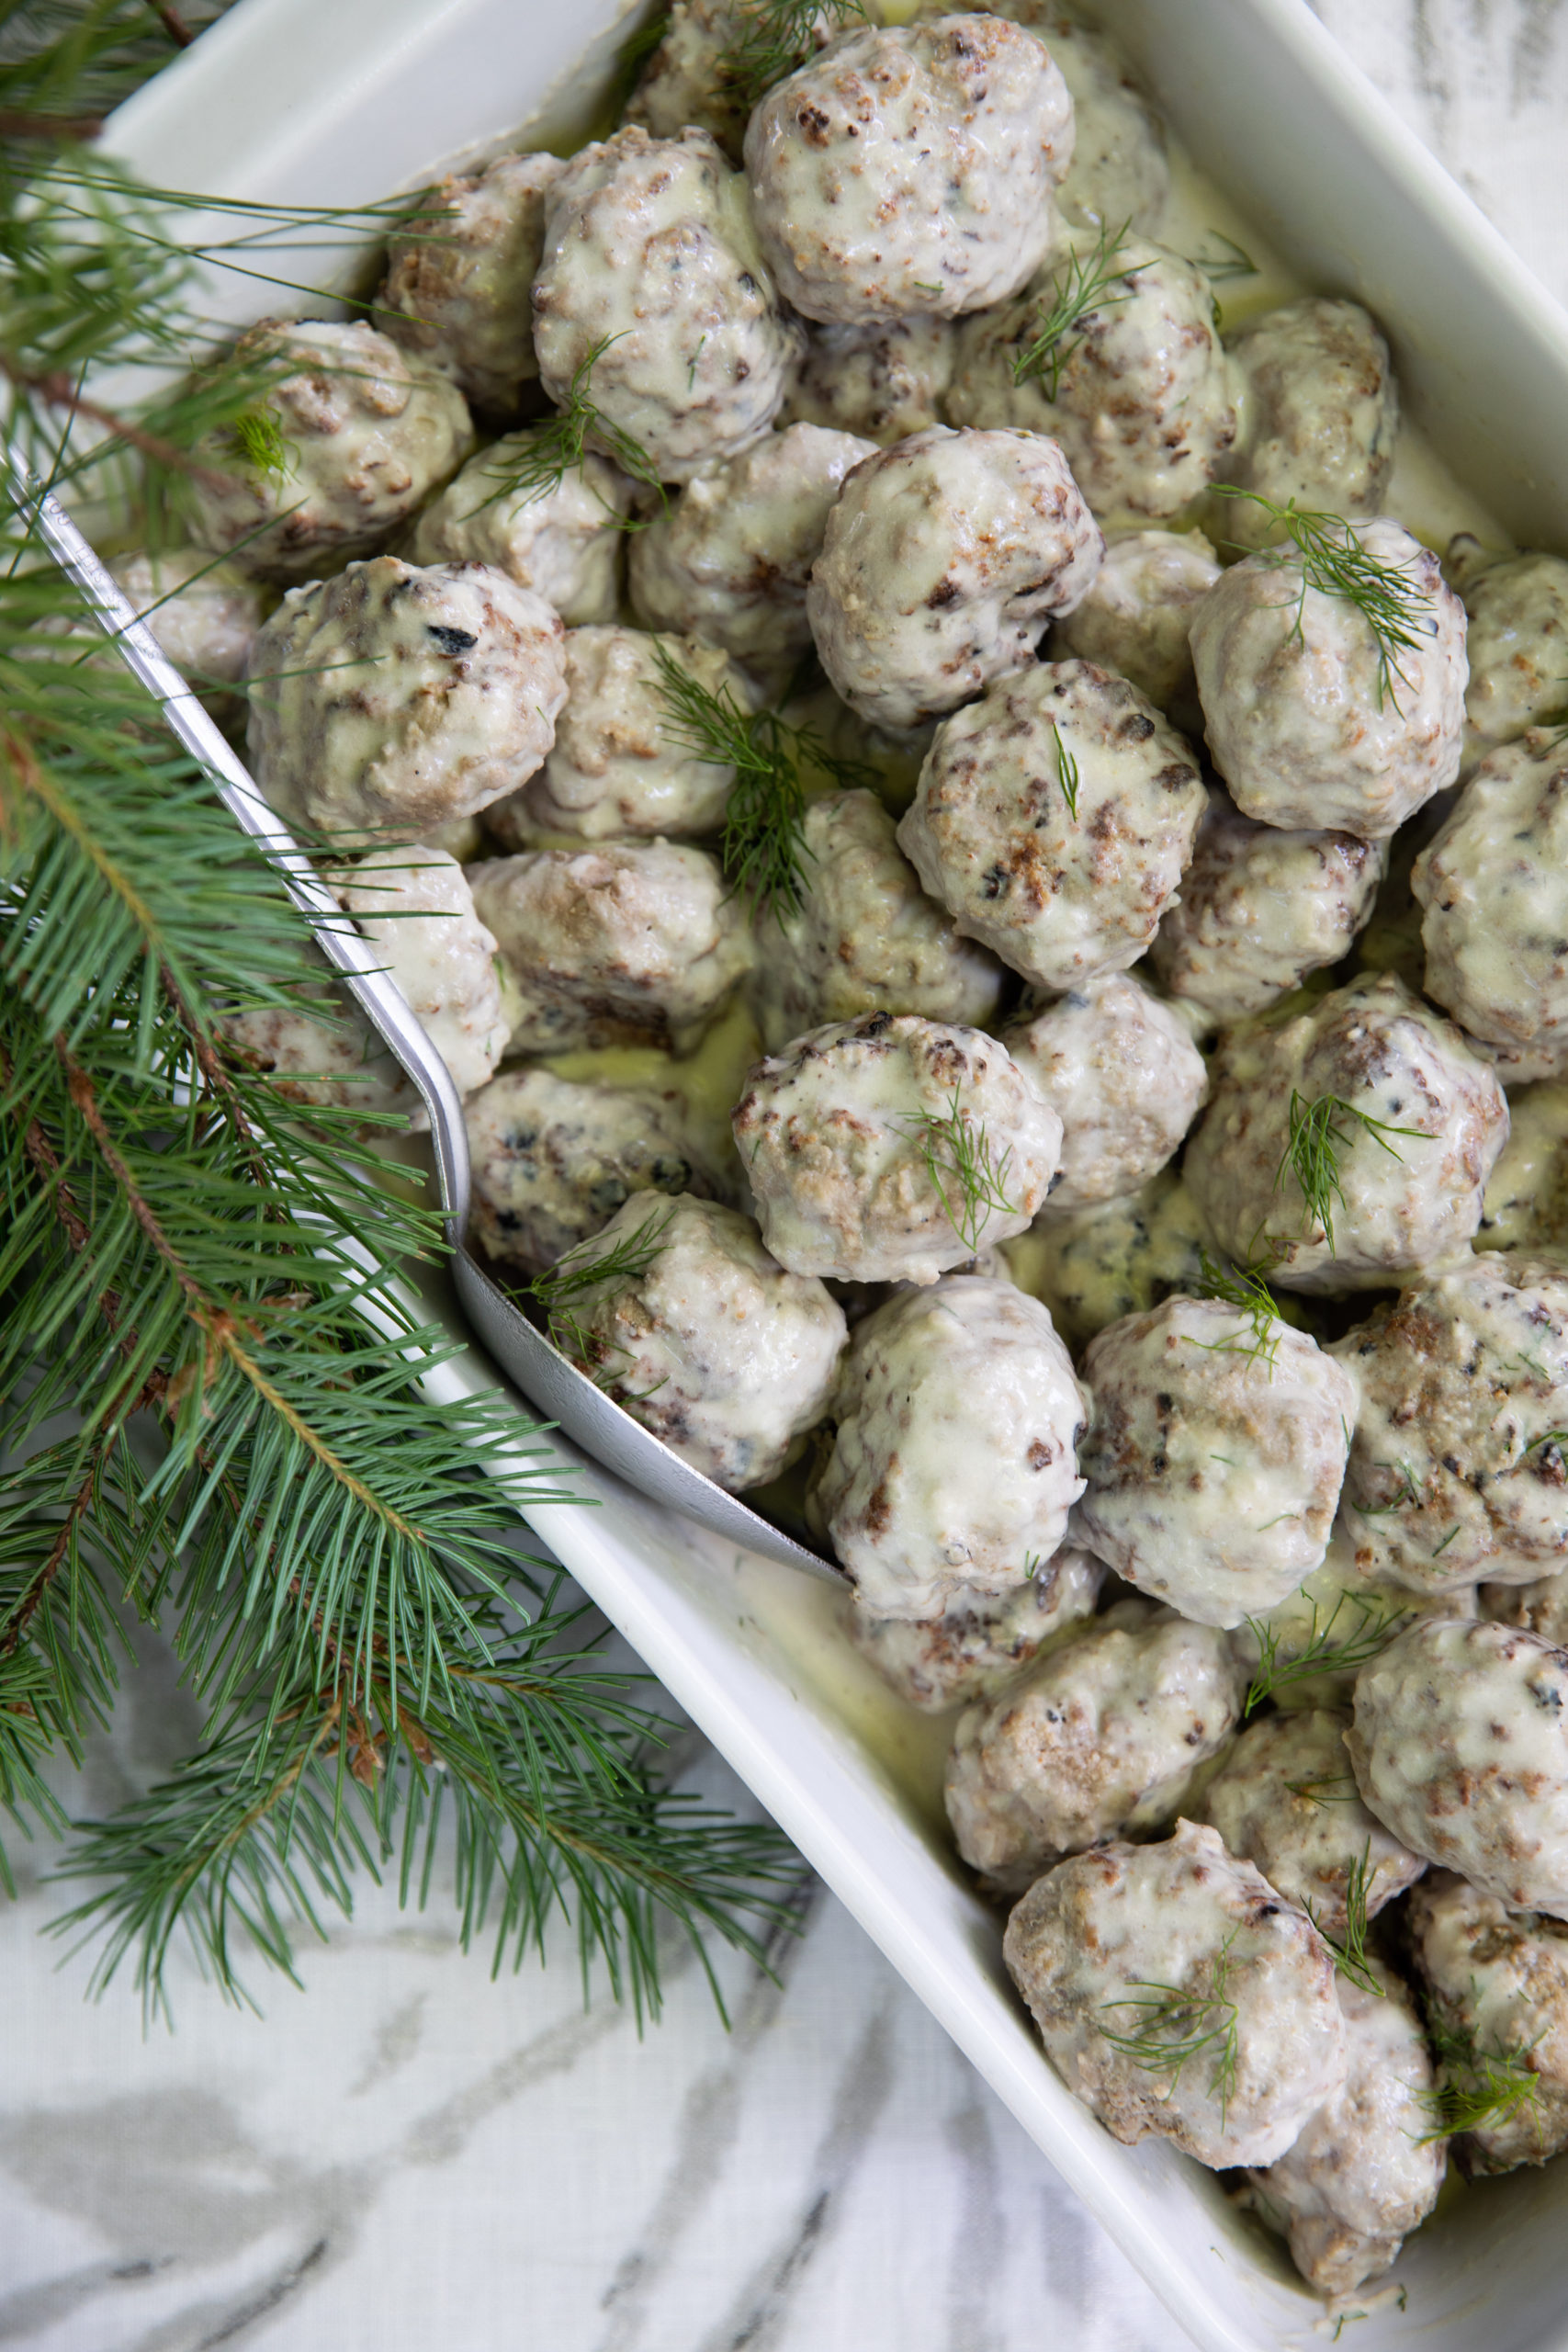 Swedish meatballs from the Loaves & Fishes Farm Series cookbooks.